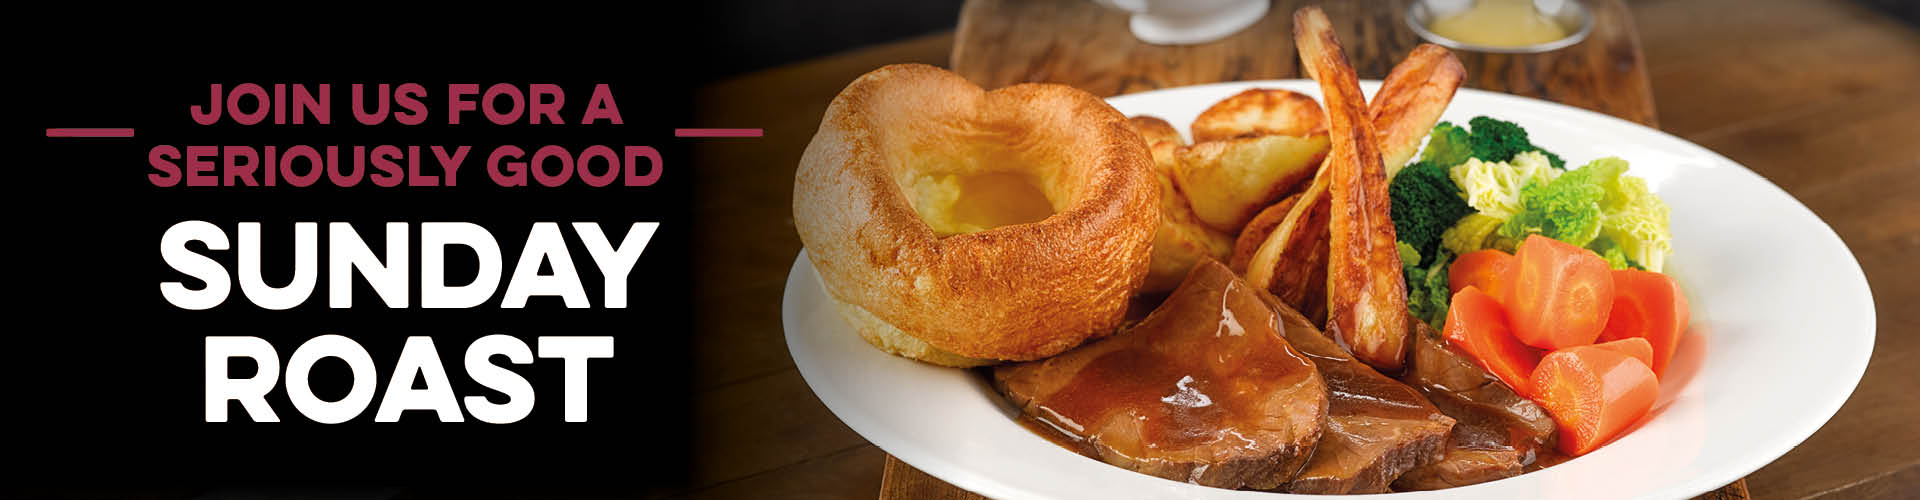 Enjoy a Sunday Roast at The English Lounge pub in Manchester